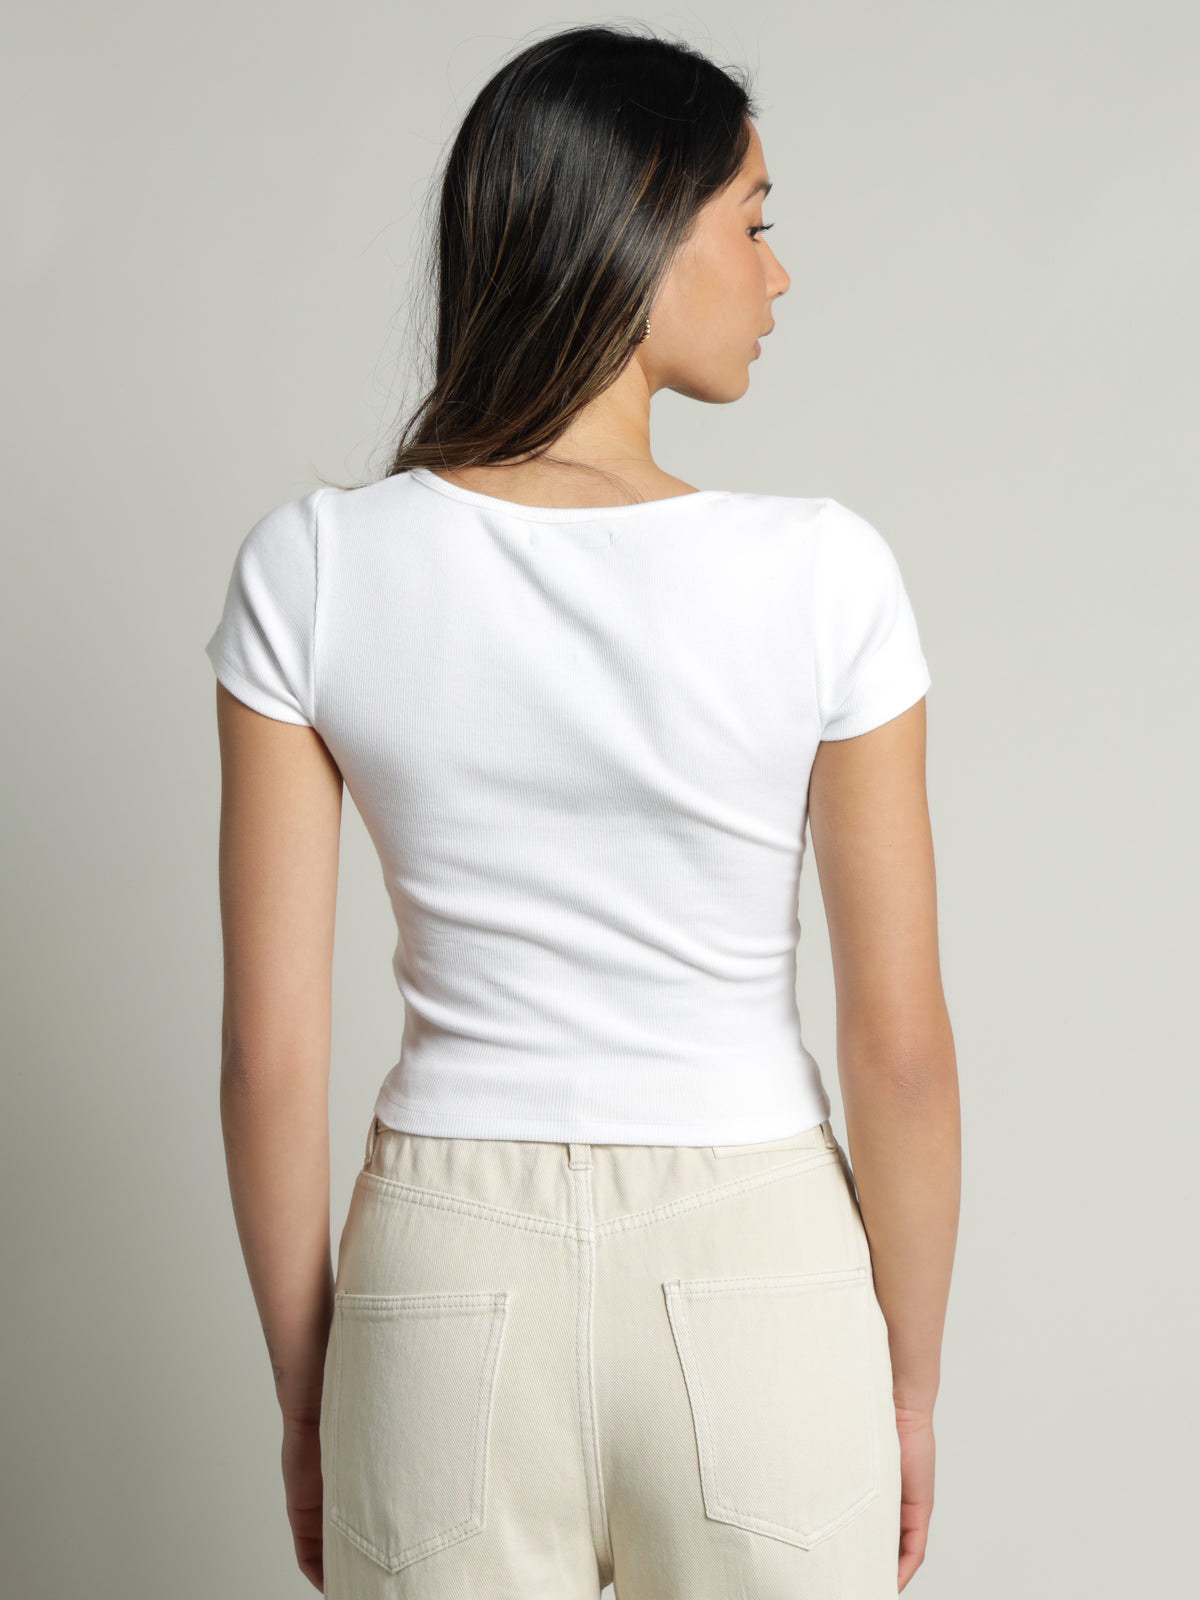 Tina Notch Front T-Shirt in White